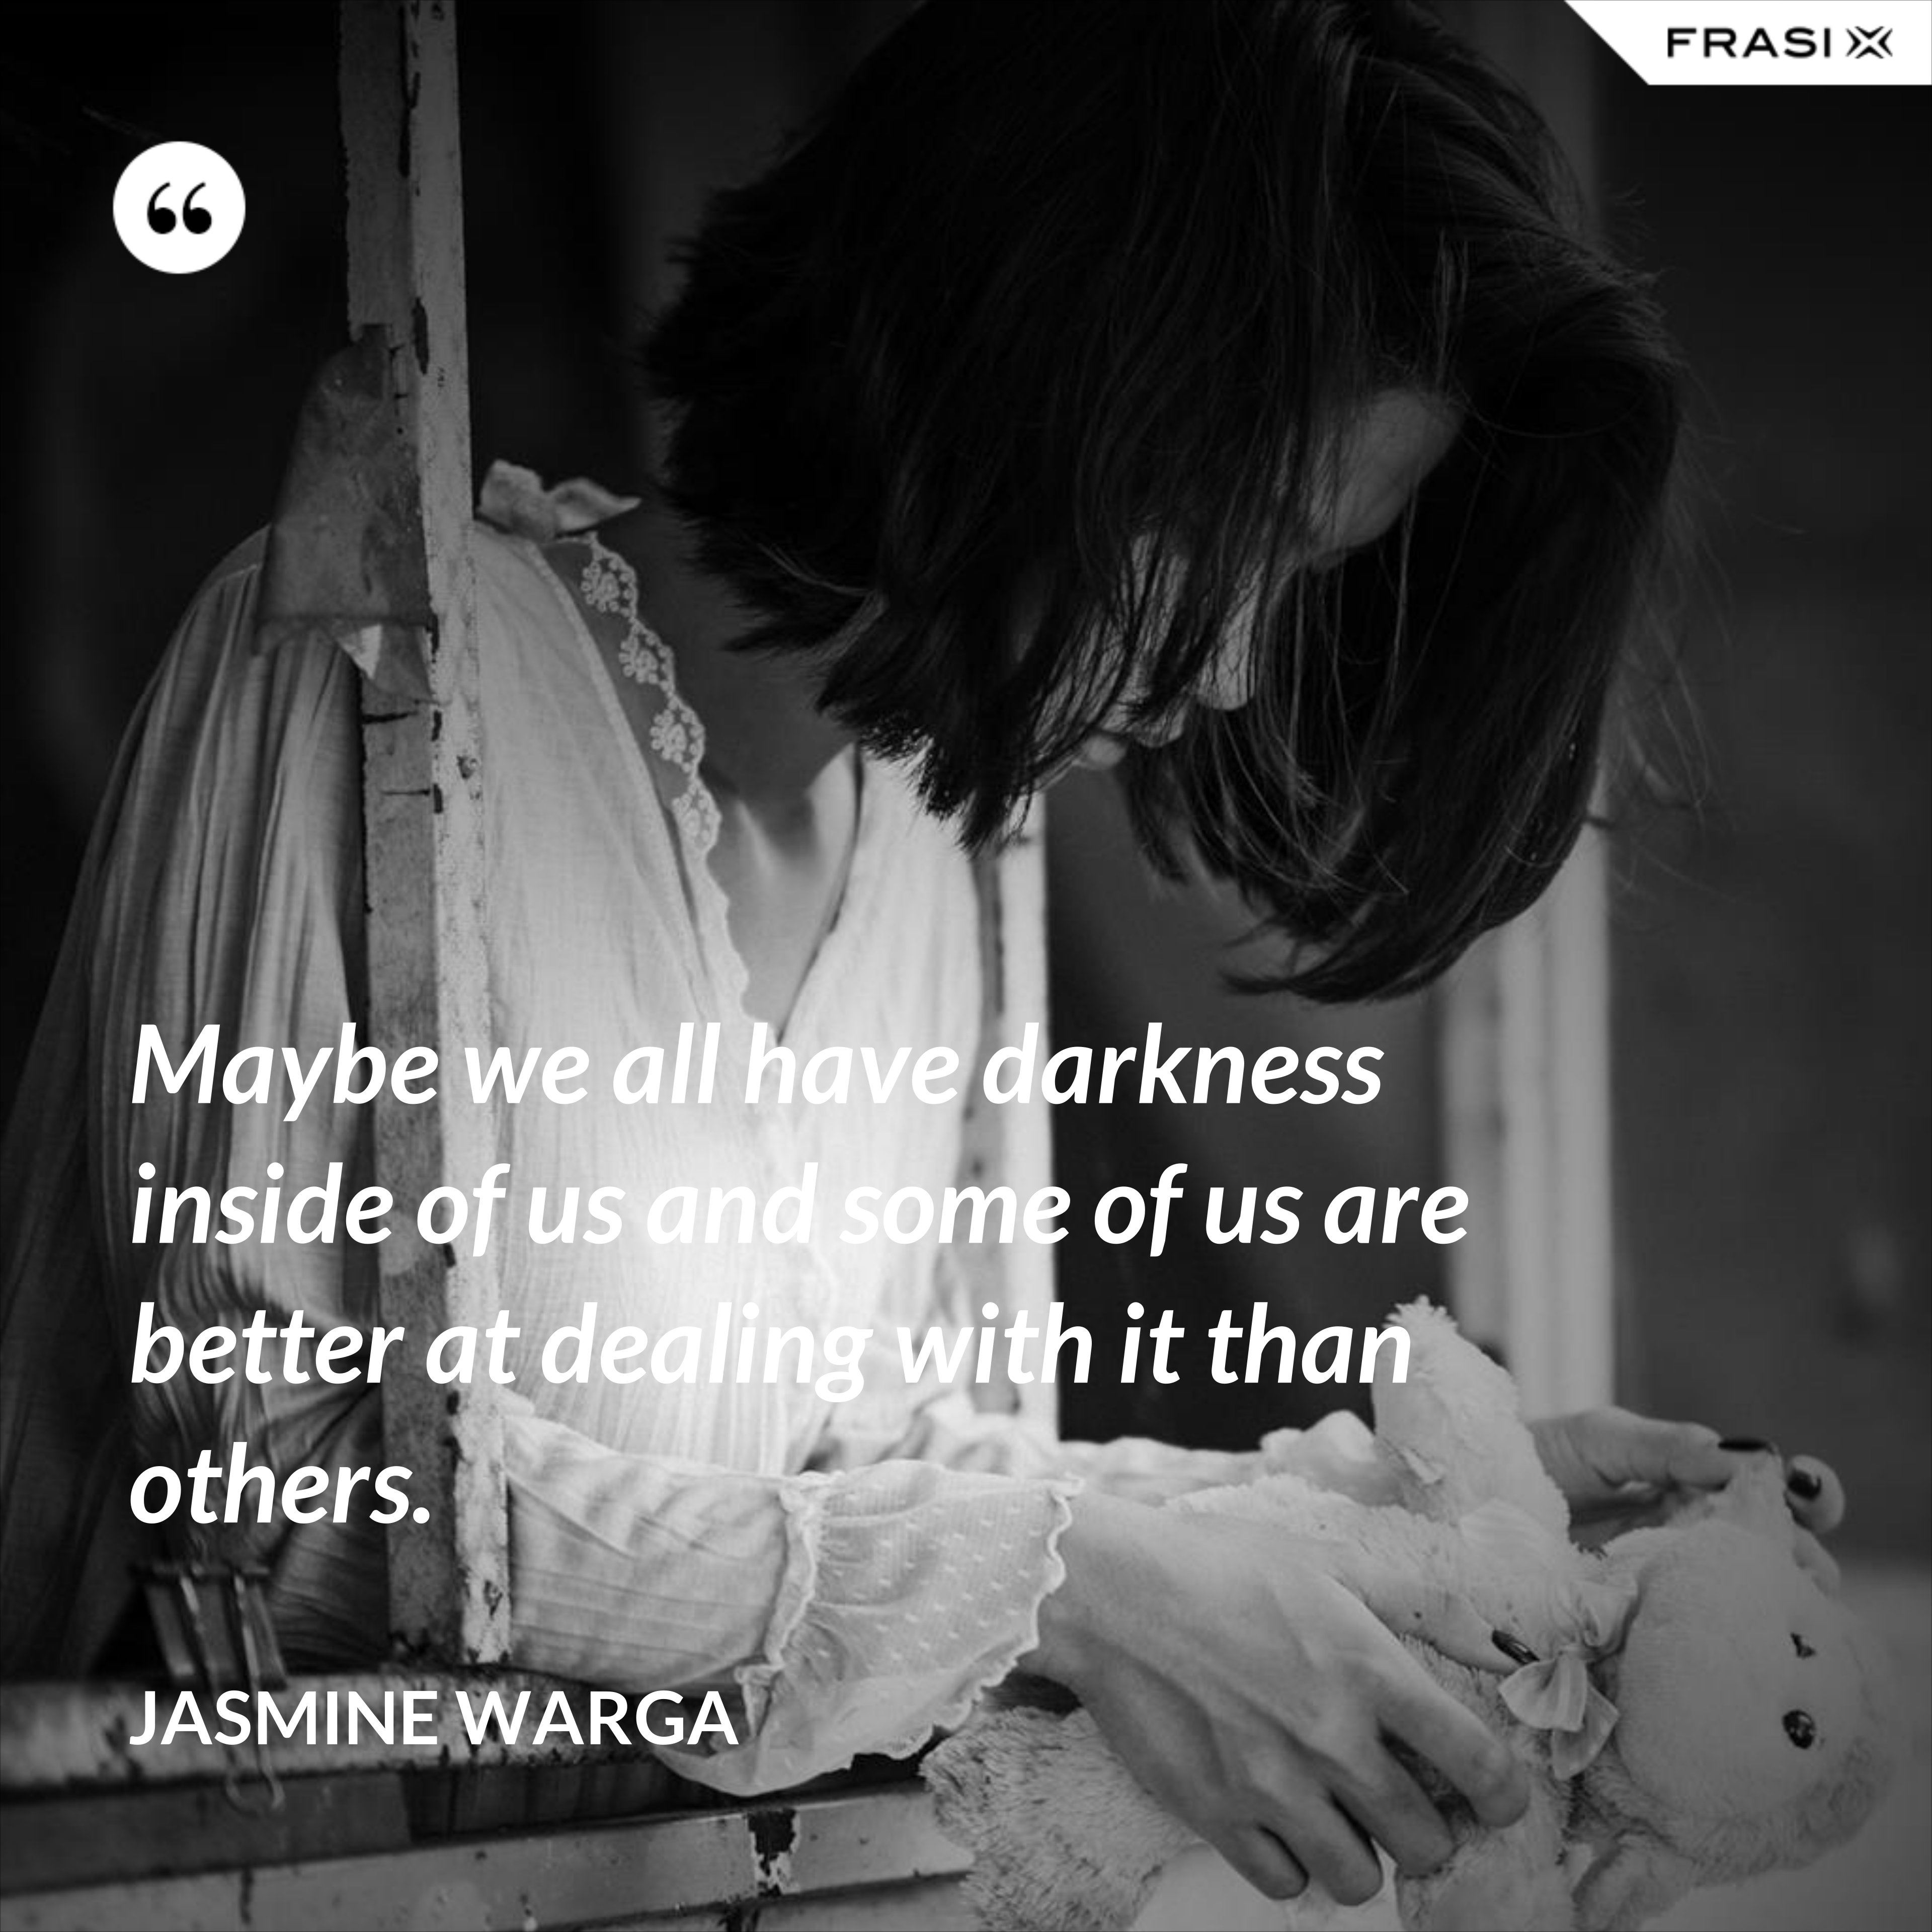 Maybe we all have darkness inside of us and some of us are better at dealing with it than others. - Jasmine Warga